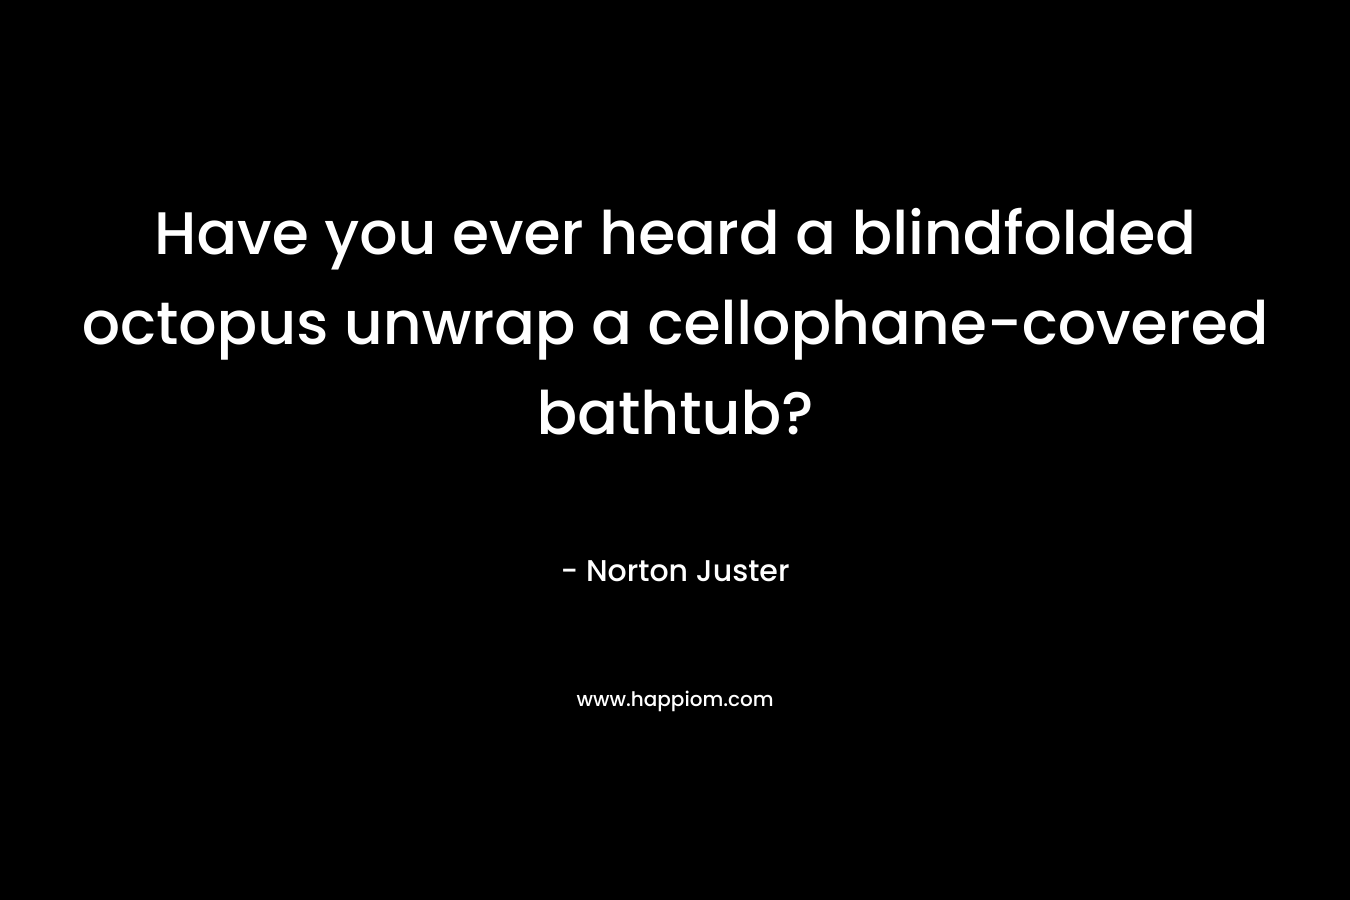 Have you ever heard a blindfolded octopus unwrap a cellophane-covered bathtub? – Norton Juster